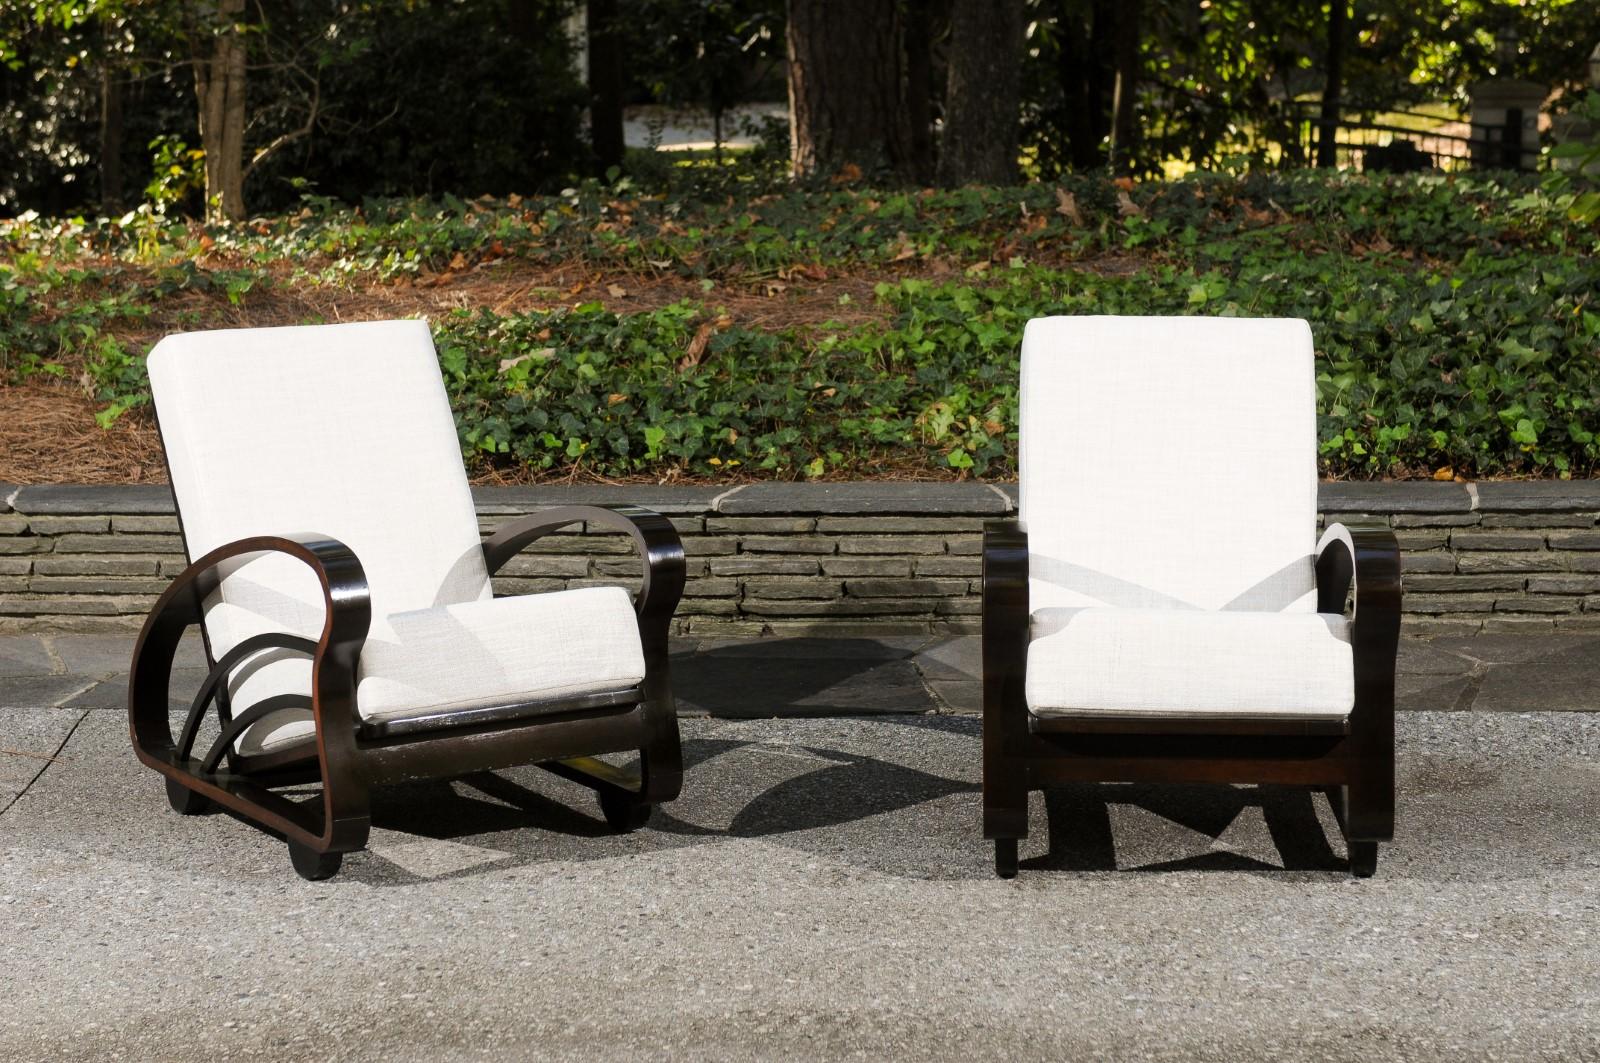 These magnificent lounge chairs are shipped as professionally photographed and described in the listing narrative: Meticulously professionally restored and upholstered. Expert custom upholstery service is available. 

A jaw-dropping set of four